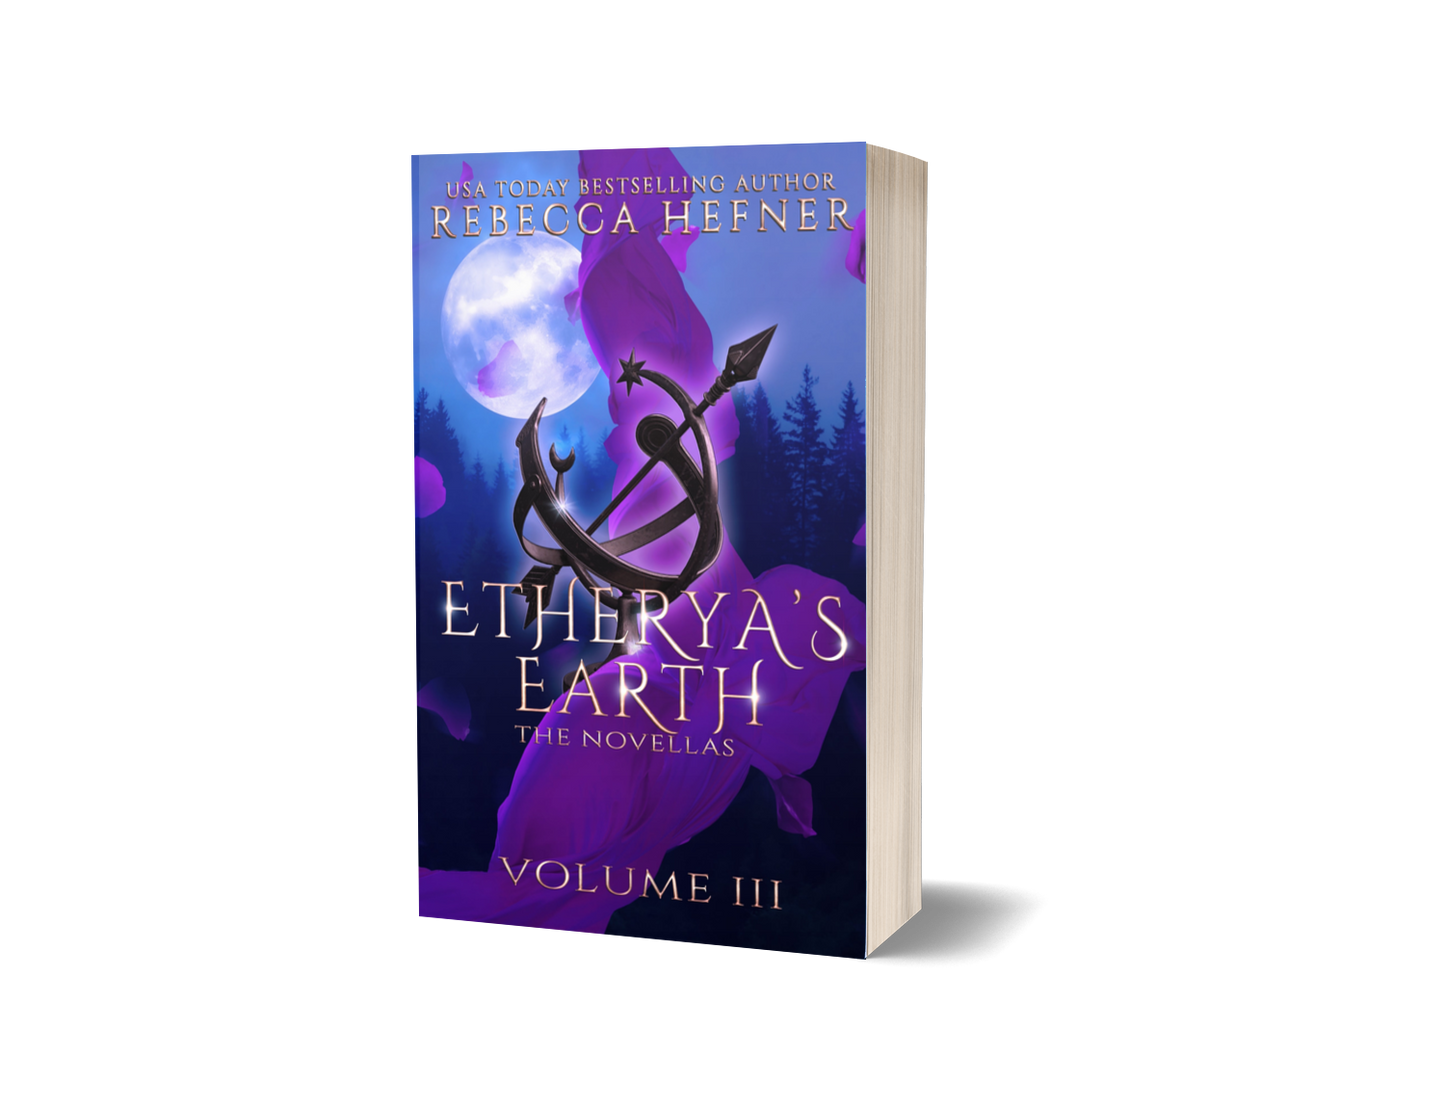 Etherya's Earth Volume III: The Novellas Signed Paperback with Special Edition Cover